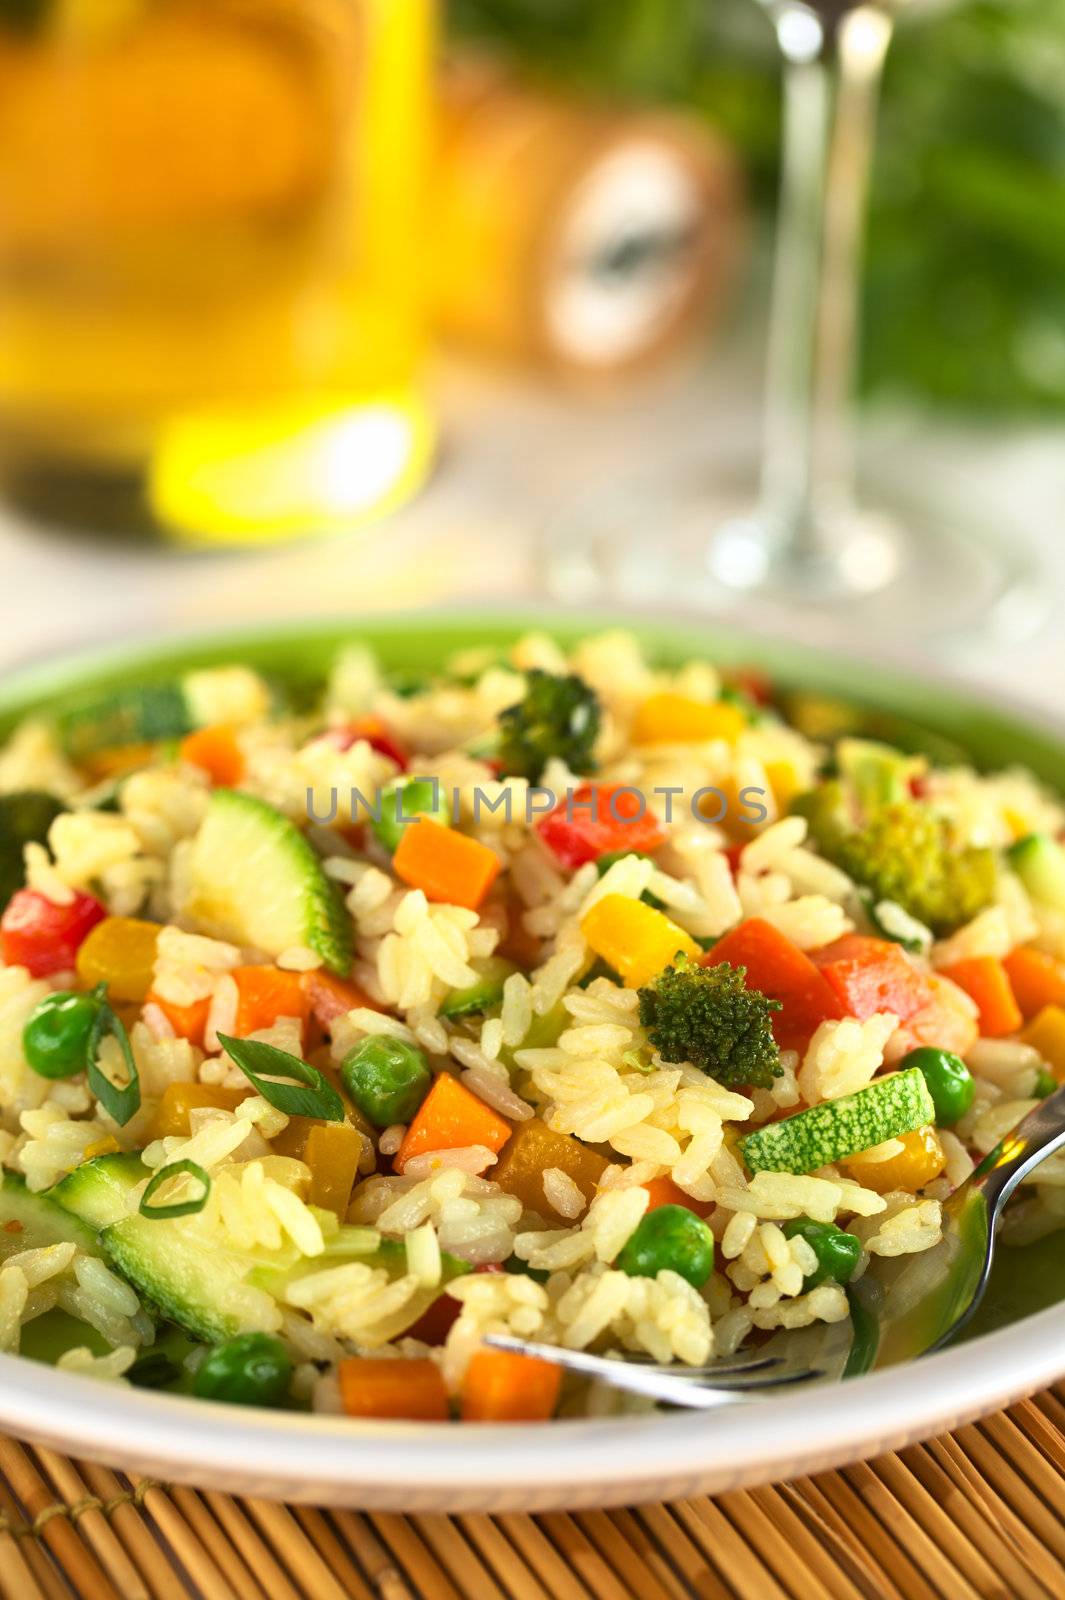 Vegetable Risotto by ildi